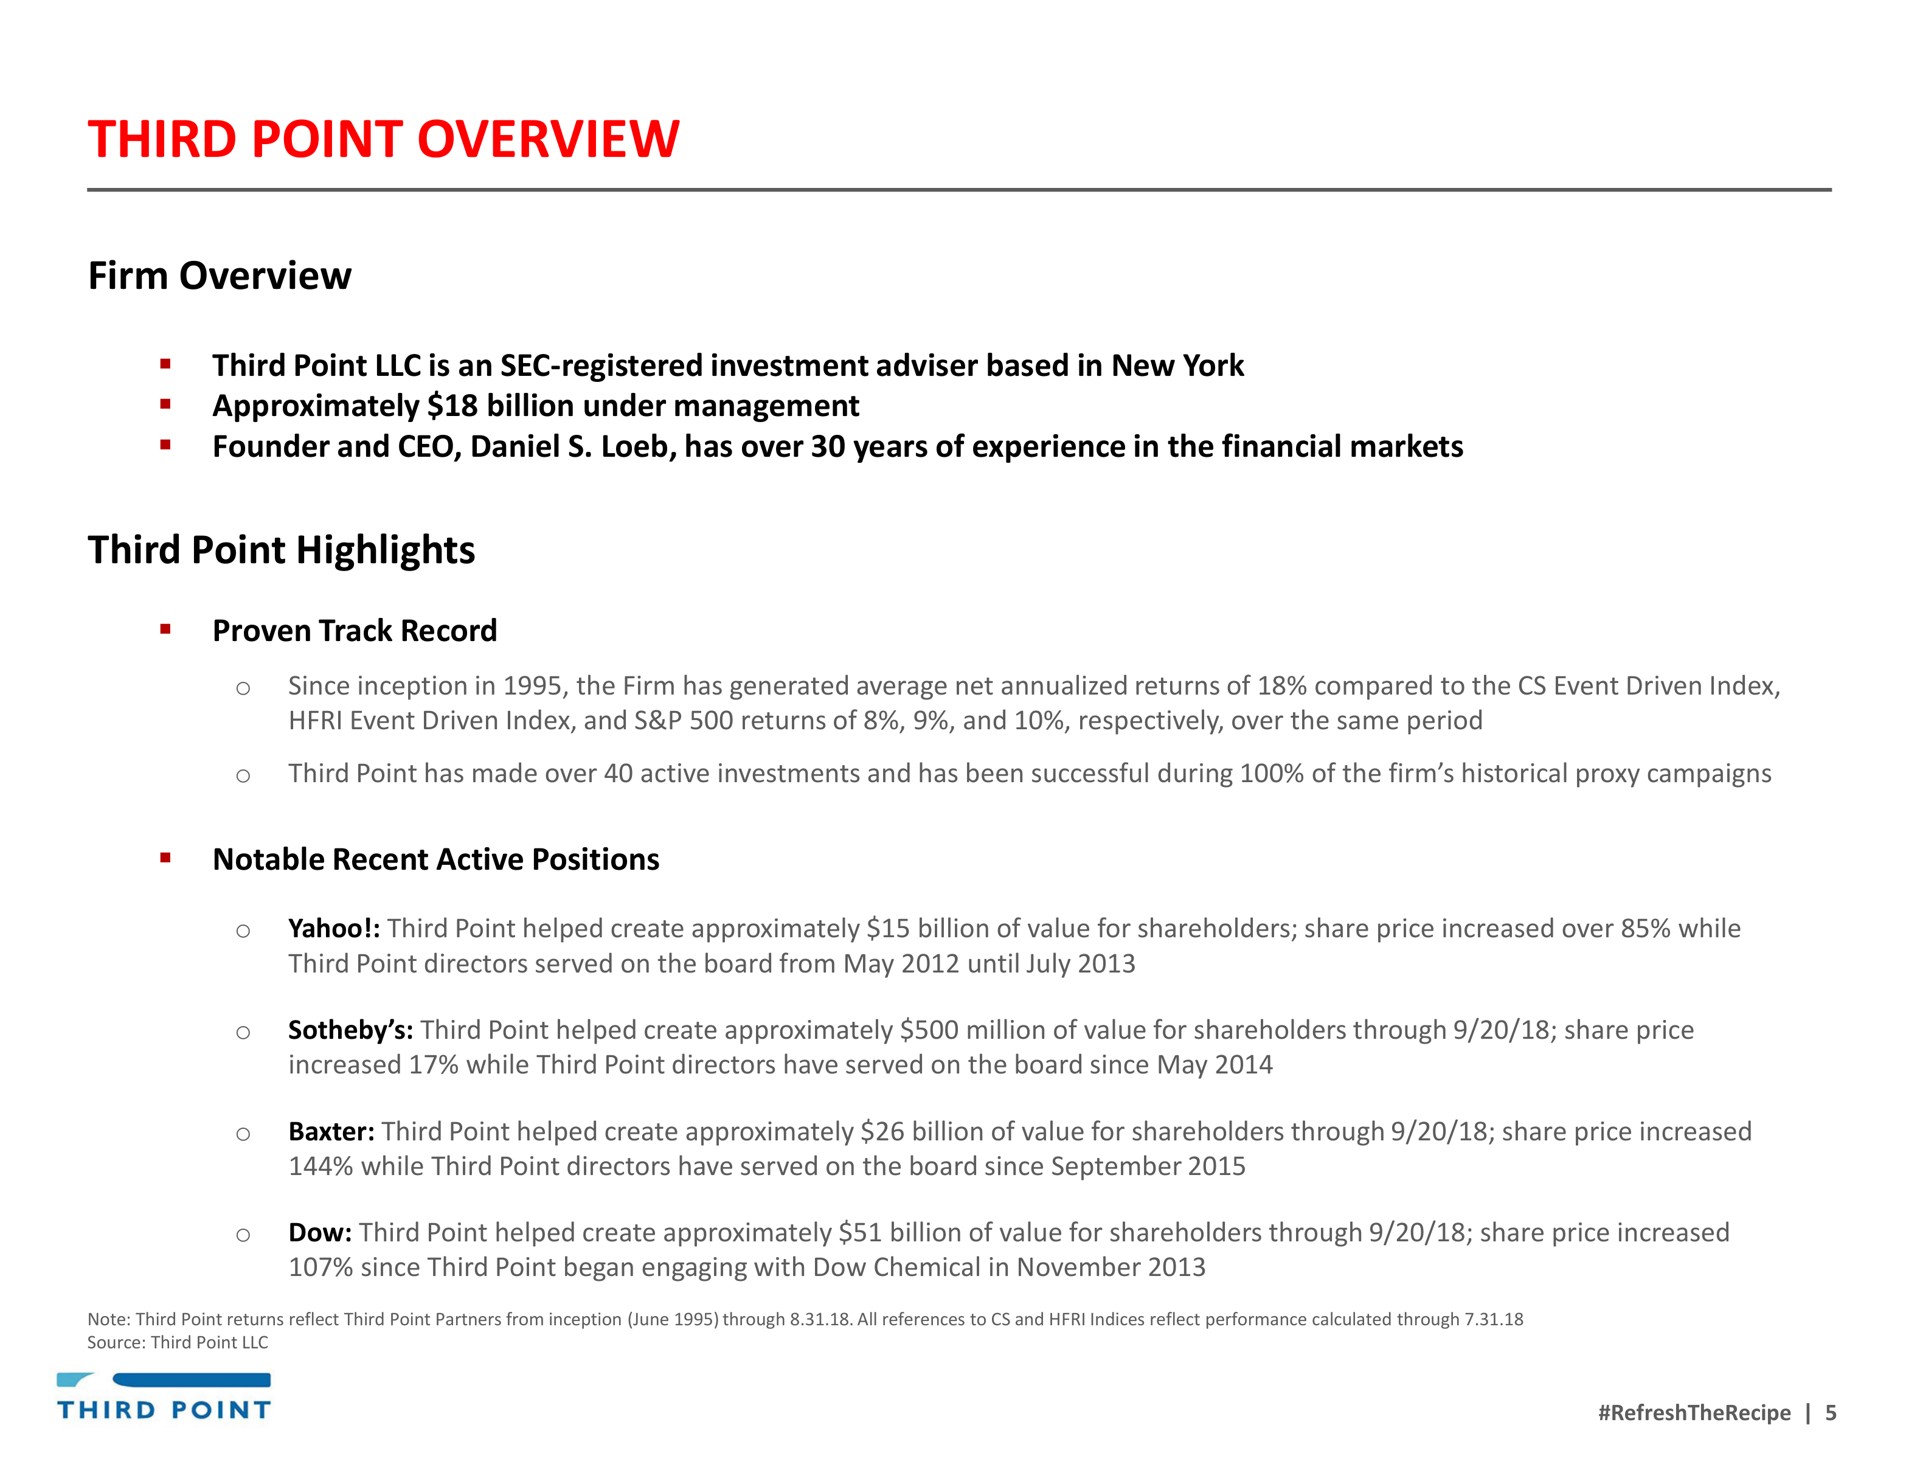 third point overview firm overview third point highlights | Third Point Management